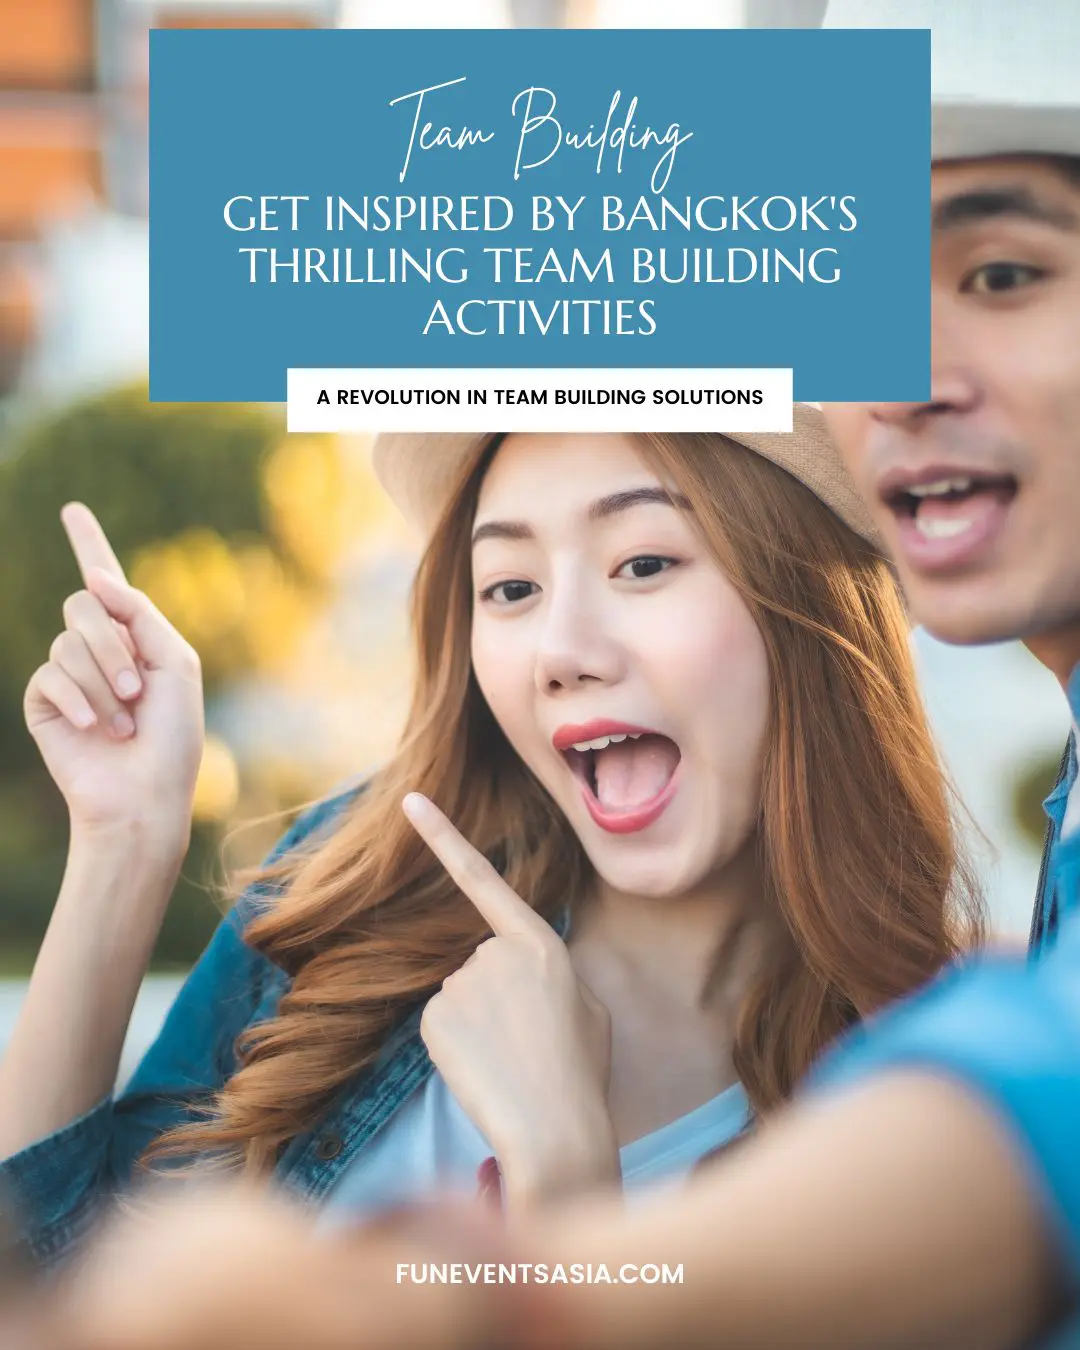 Get Inspired by Bangkok's Thrilling Team Building Activities